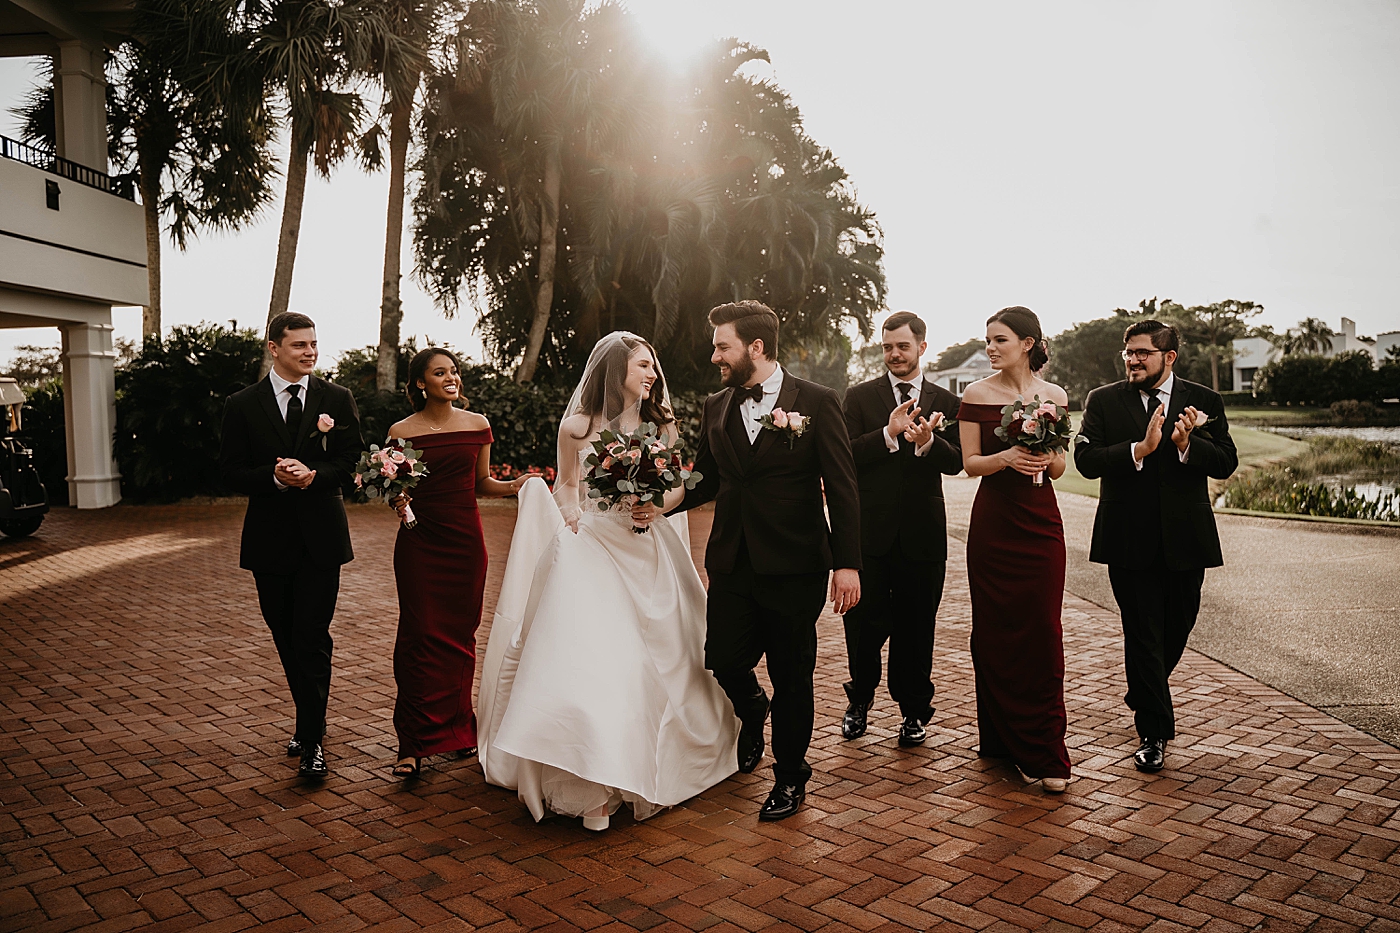 Bride and Groom walking holding hands and red pin white bouquet with wedding party behind them celebrating with sunset lens flare and palm trees Romantic Winter Wedding captured NYC Wedding Planner Poppy and Lynn